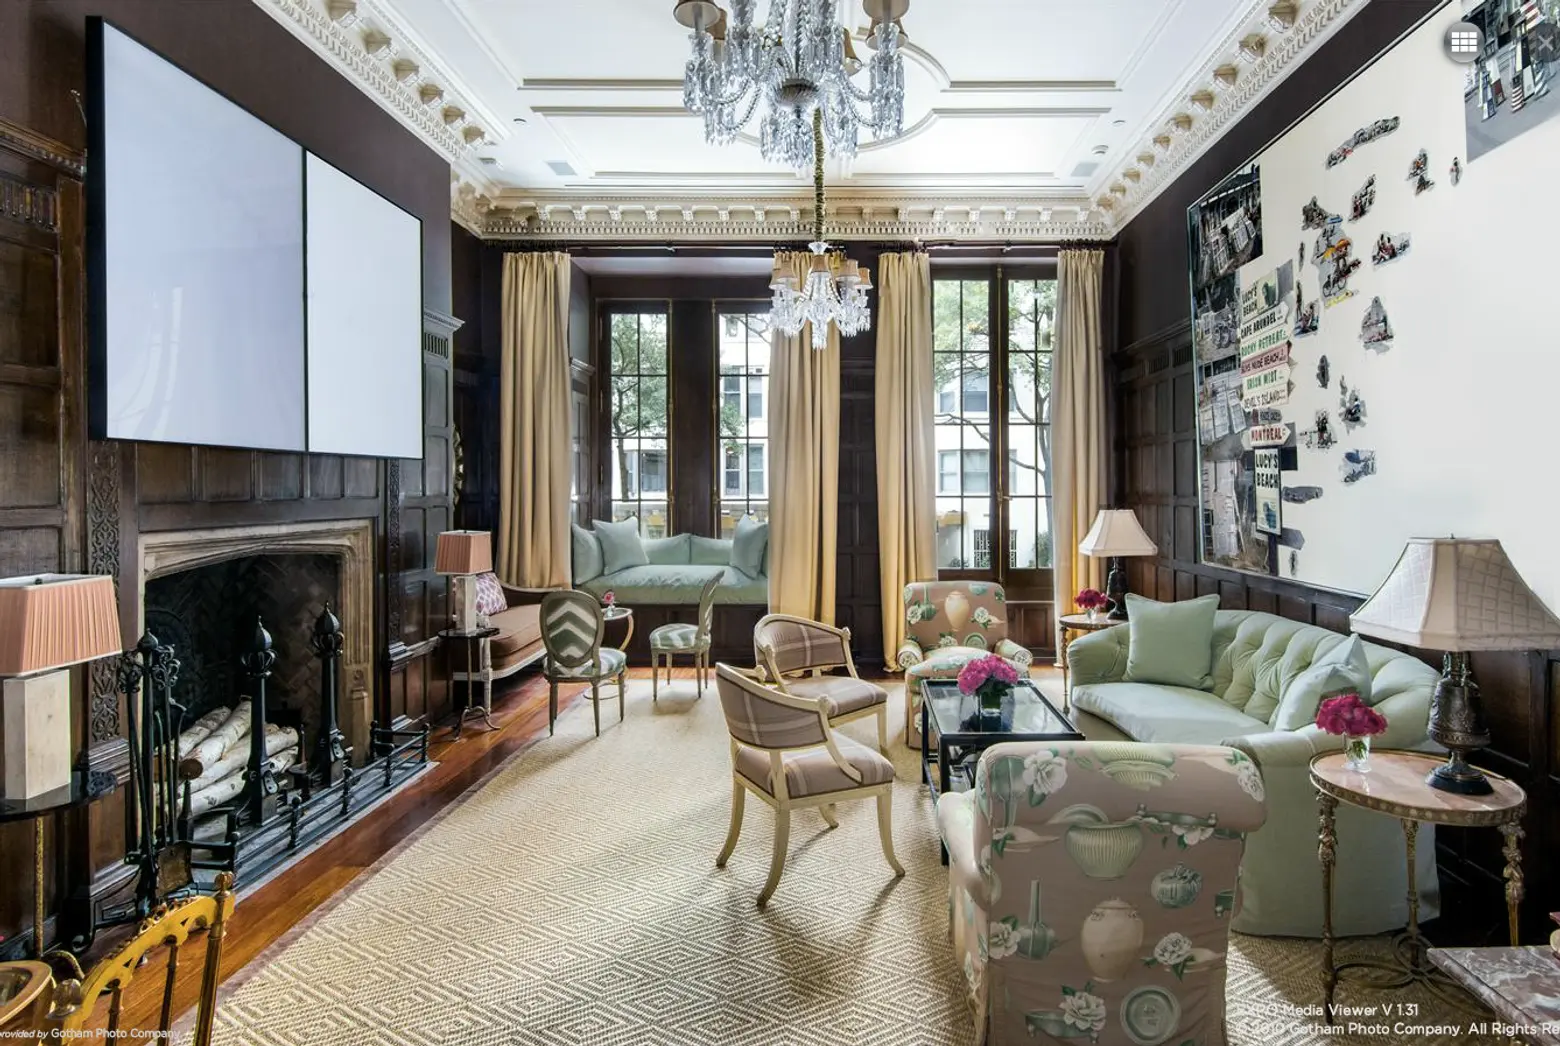 Rather Modest UES Townhouse Has Five Floors, Seven Fireplaces, Two Kitchens, Mail Center and Elevator